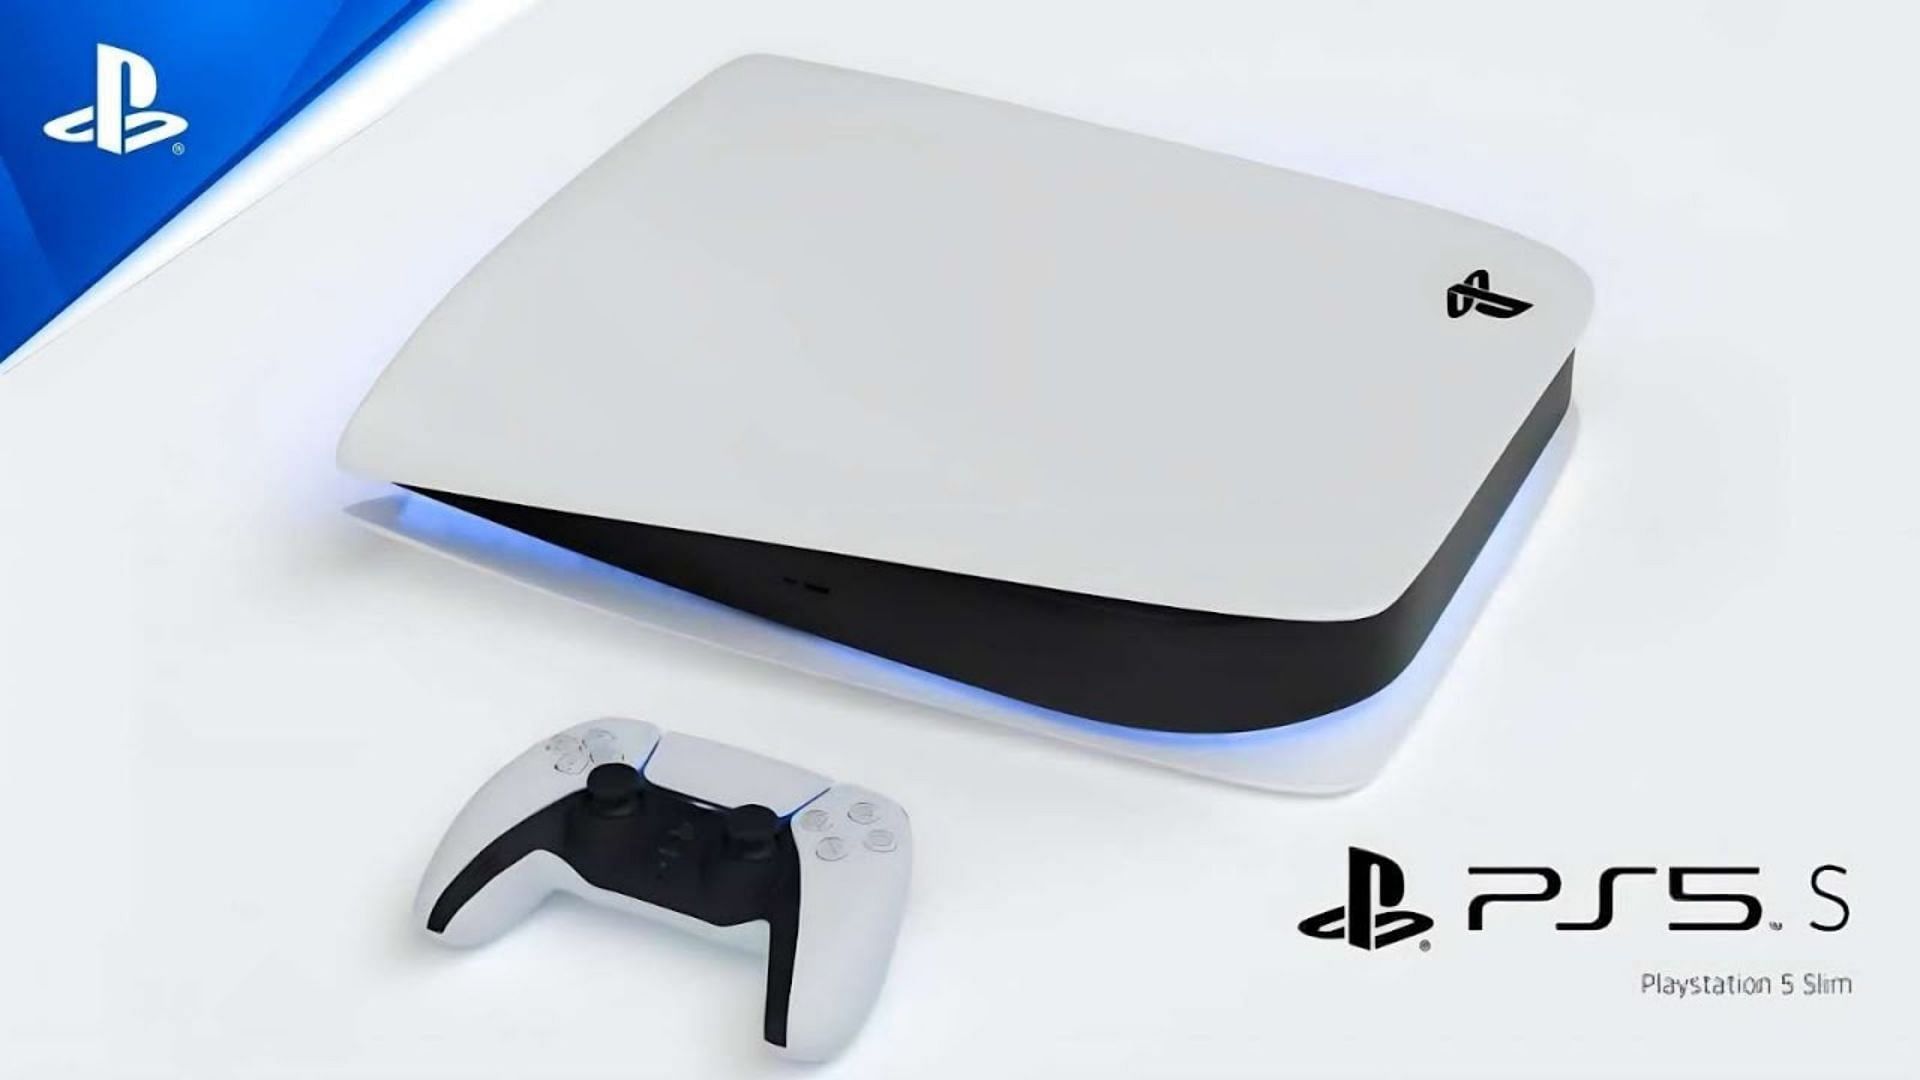 PS5 Slim specs - what has the new PS5 changed?